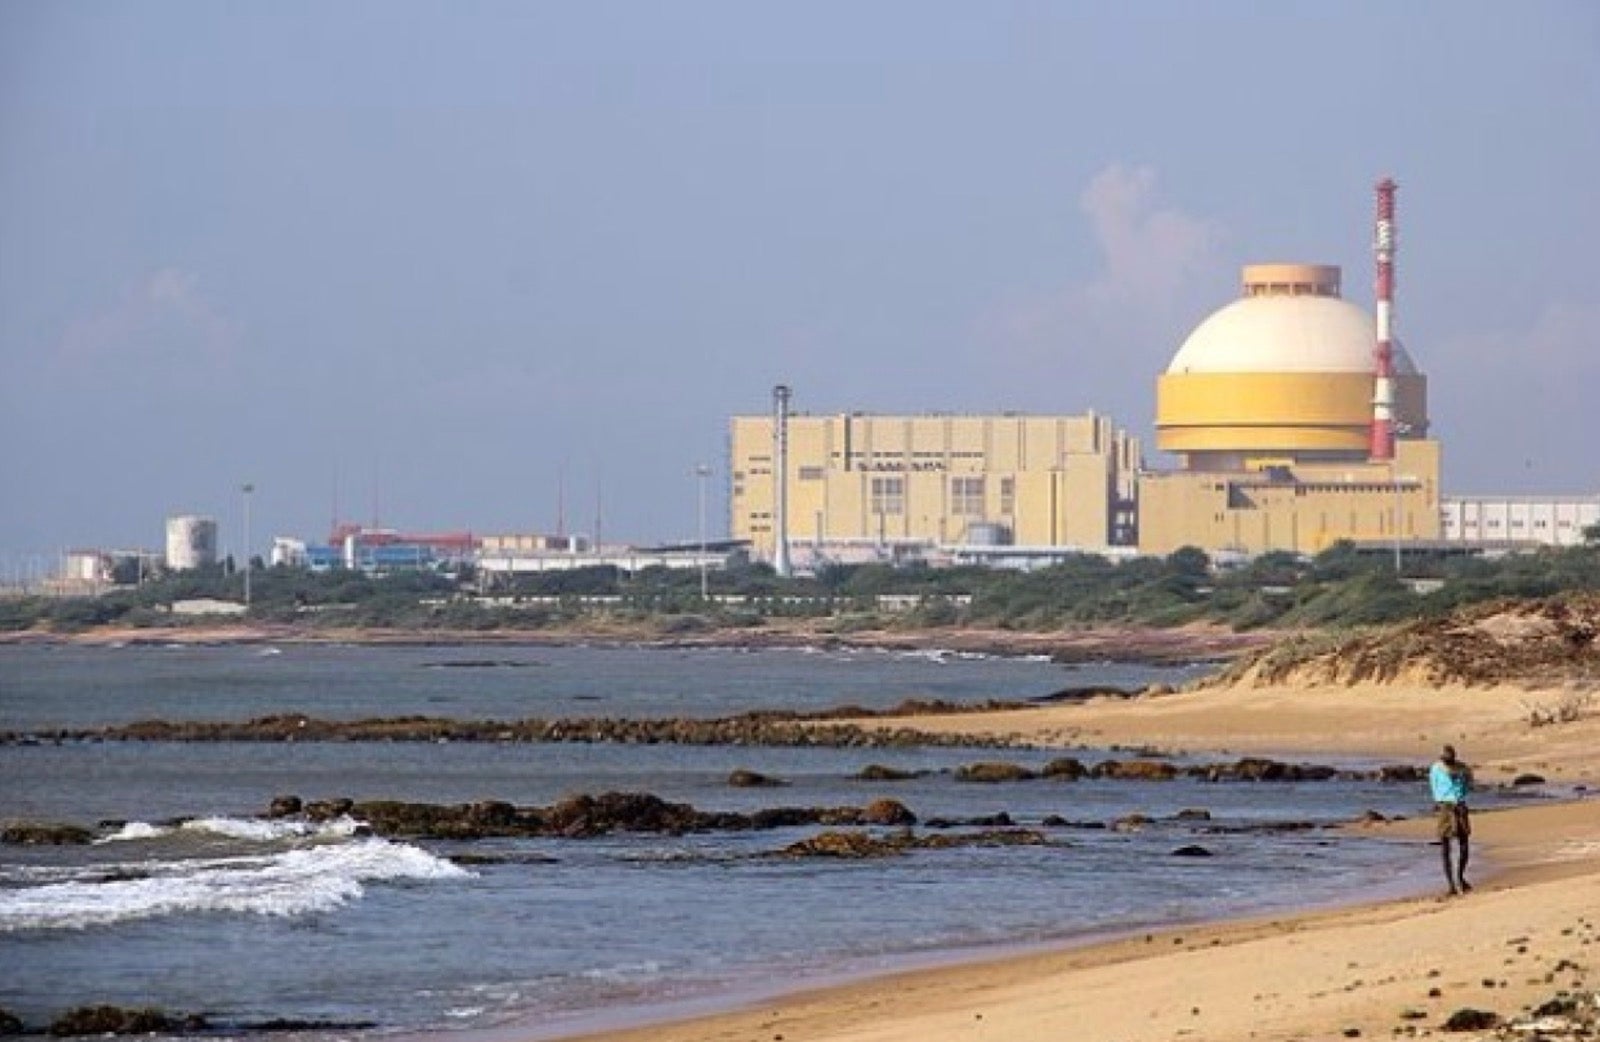 image of Indian Nuclear Power Plant